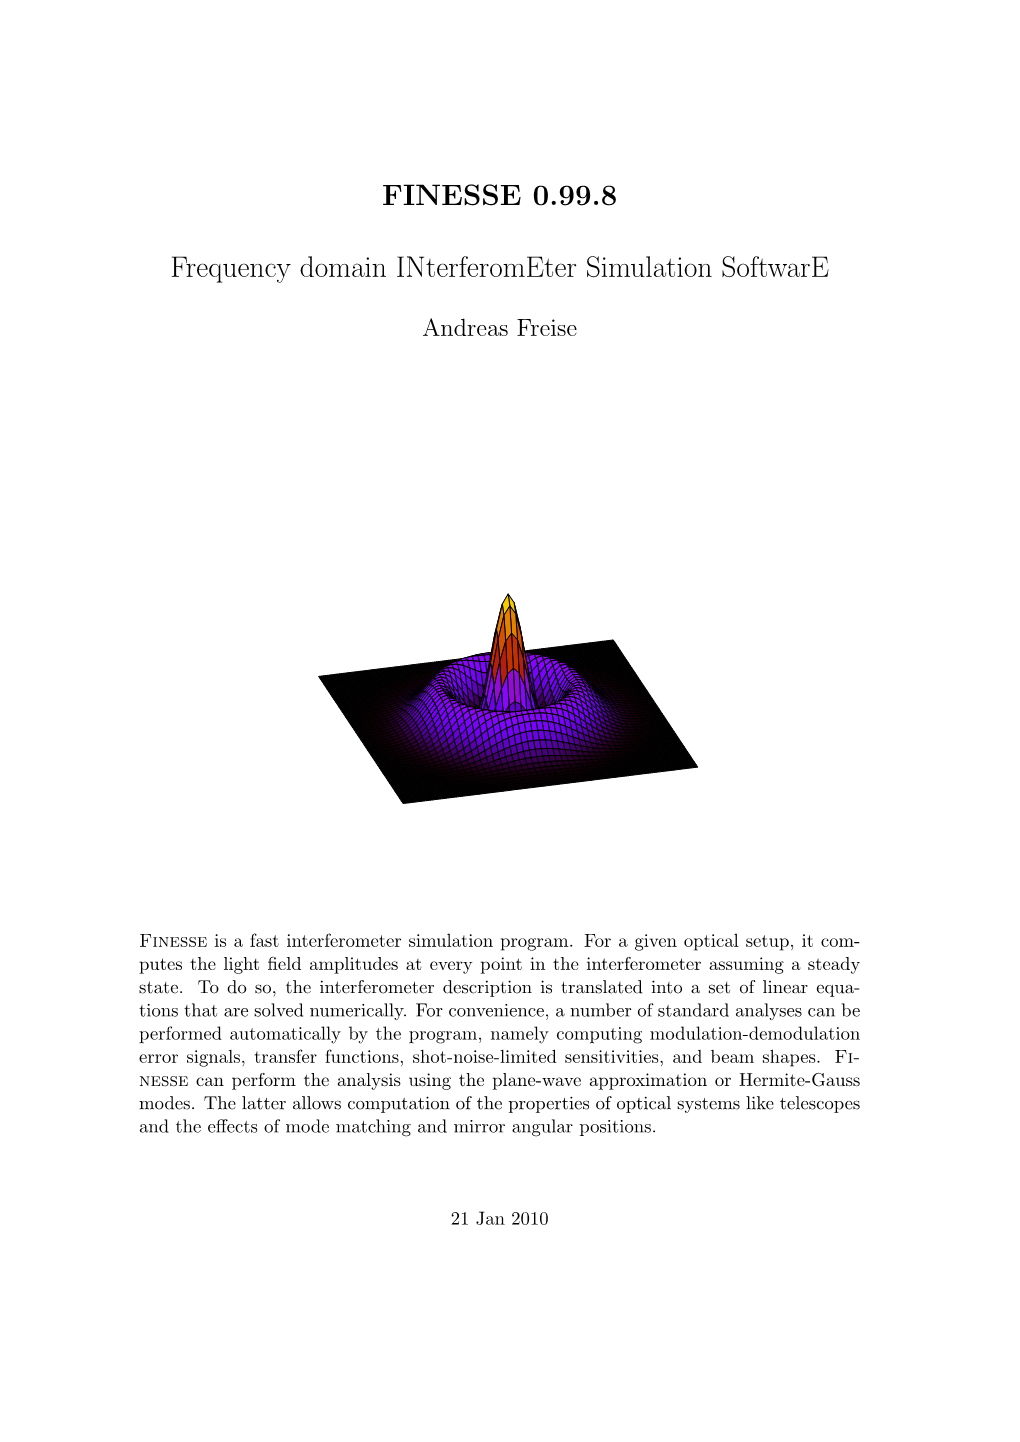 FINESSE 0.99, Frequency Domain Interferometer Simulation Software